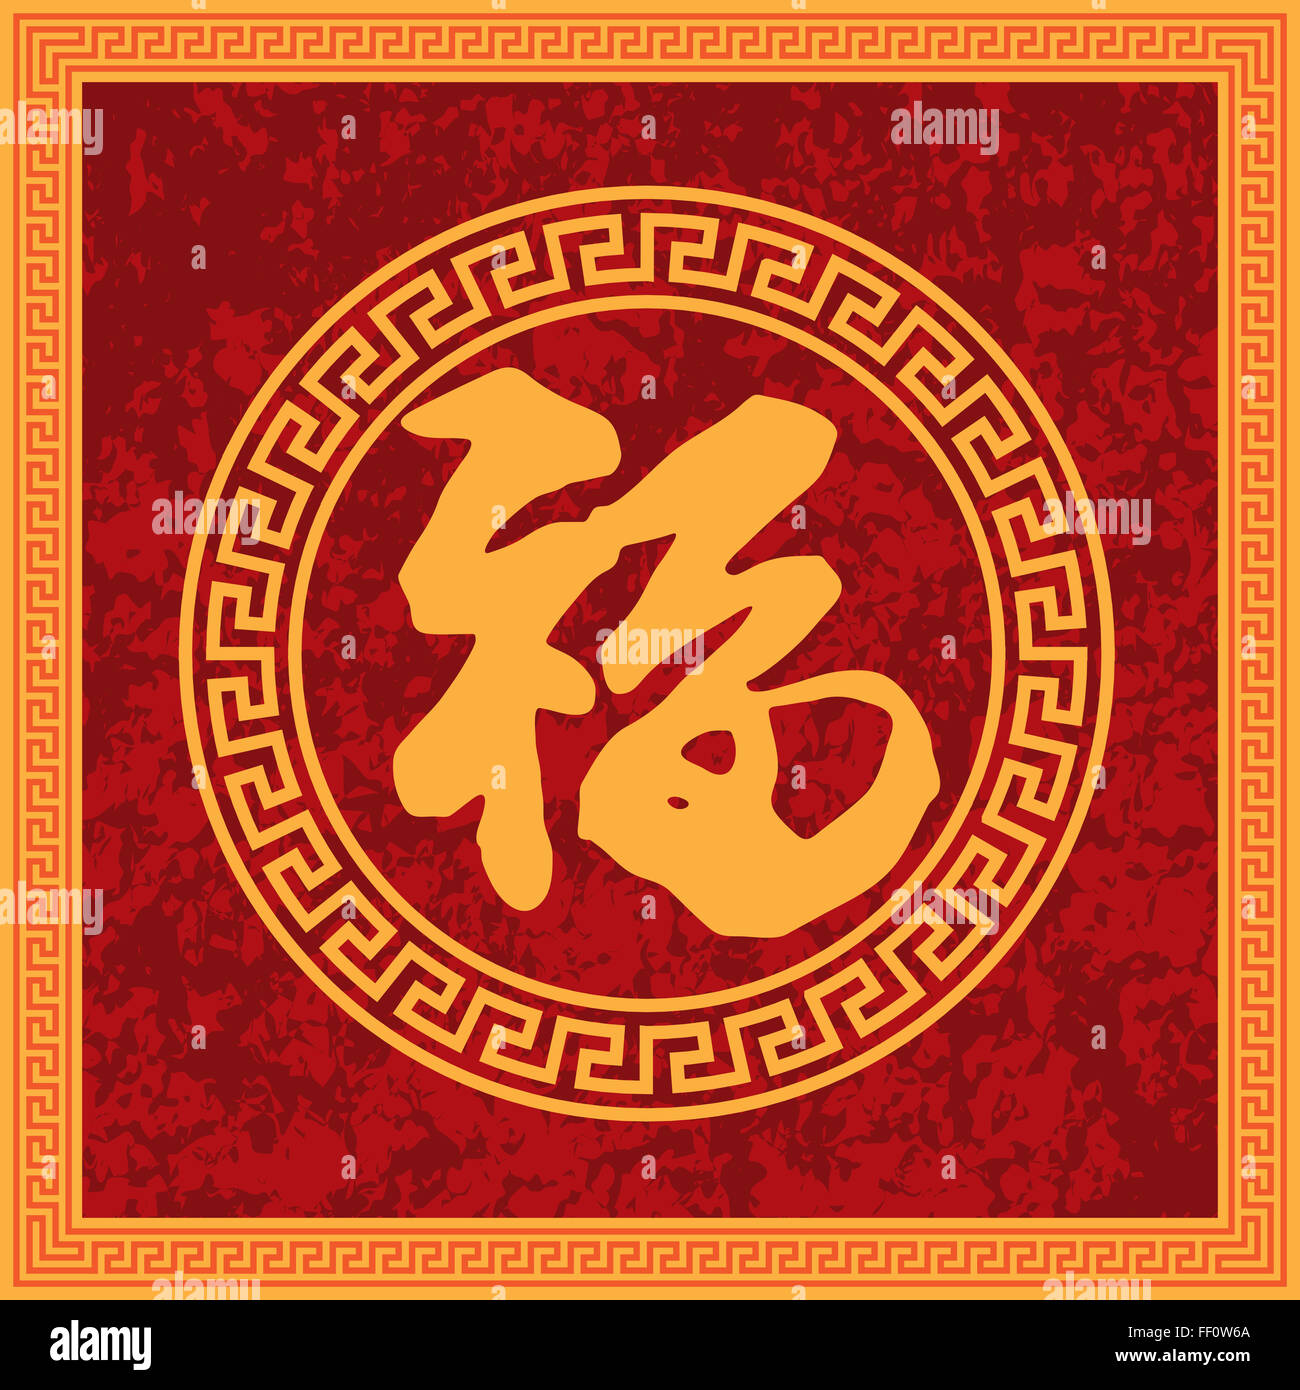 Chinese Good Fortune Calligraphy Text in Square Texture Red Background Frame Illustration Stock Photo